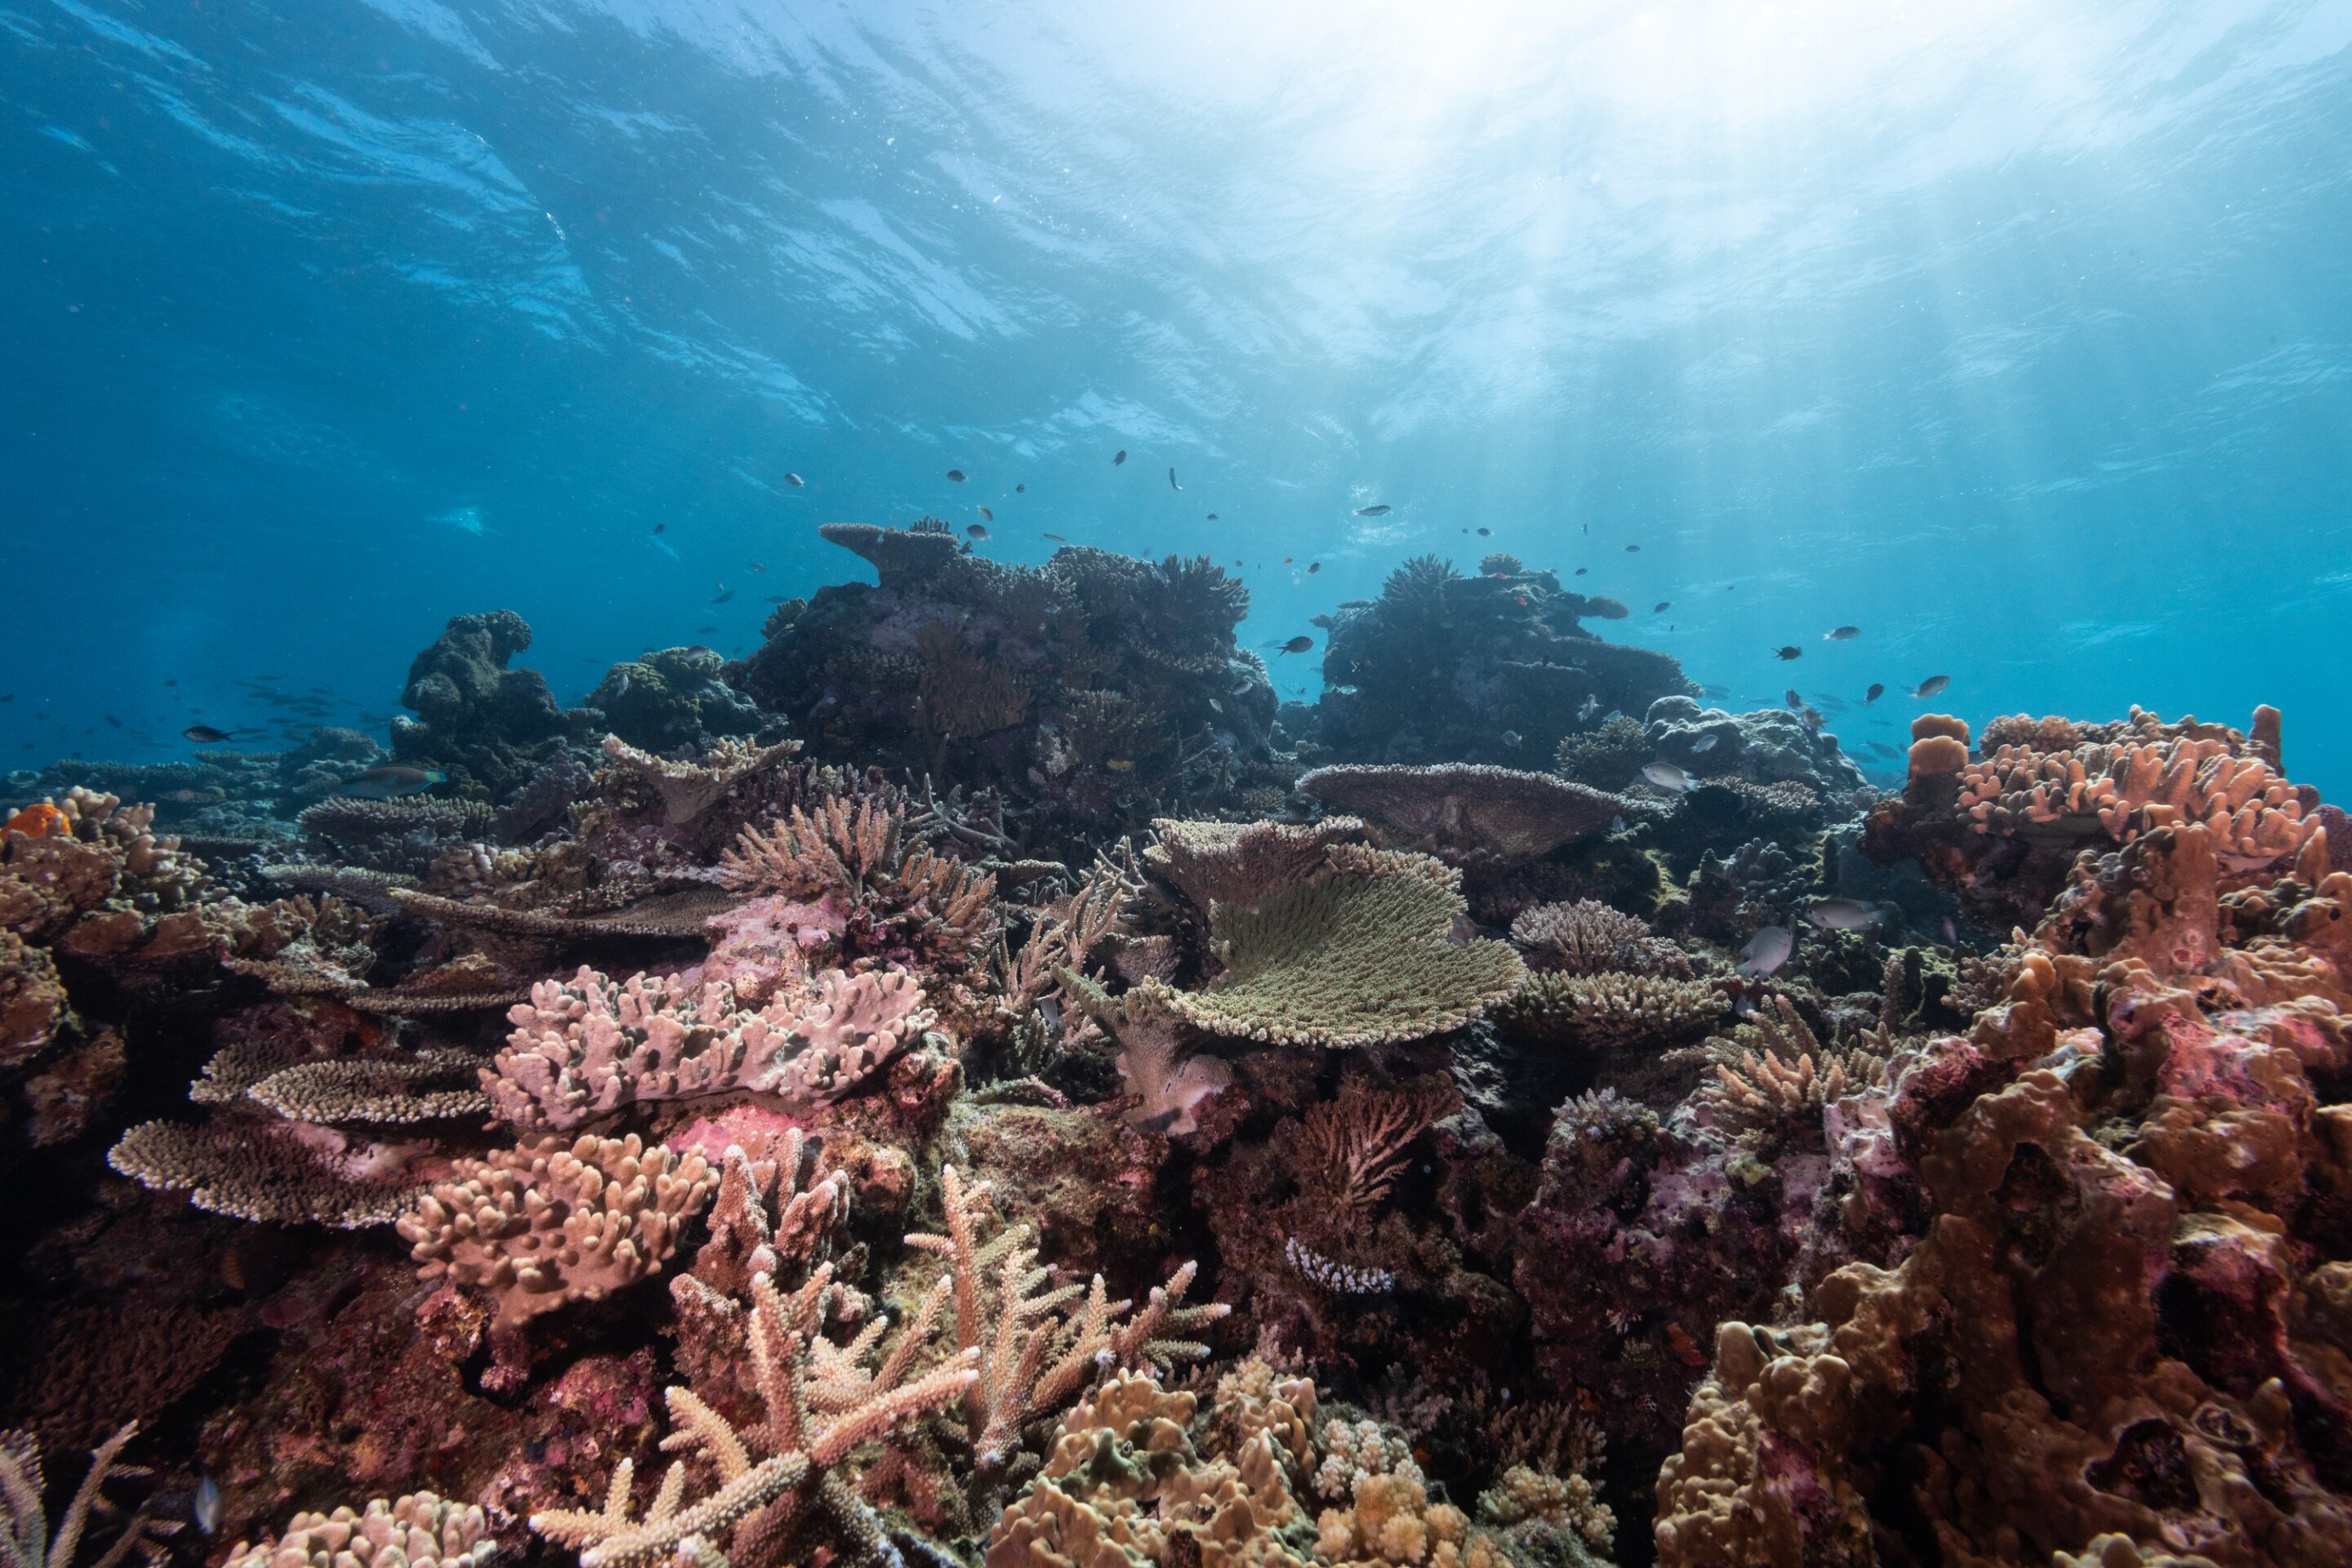 #Urgent action is required to protect world’s coral reefs from disappearing within three decades, warn experts